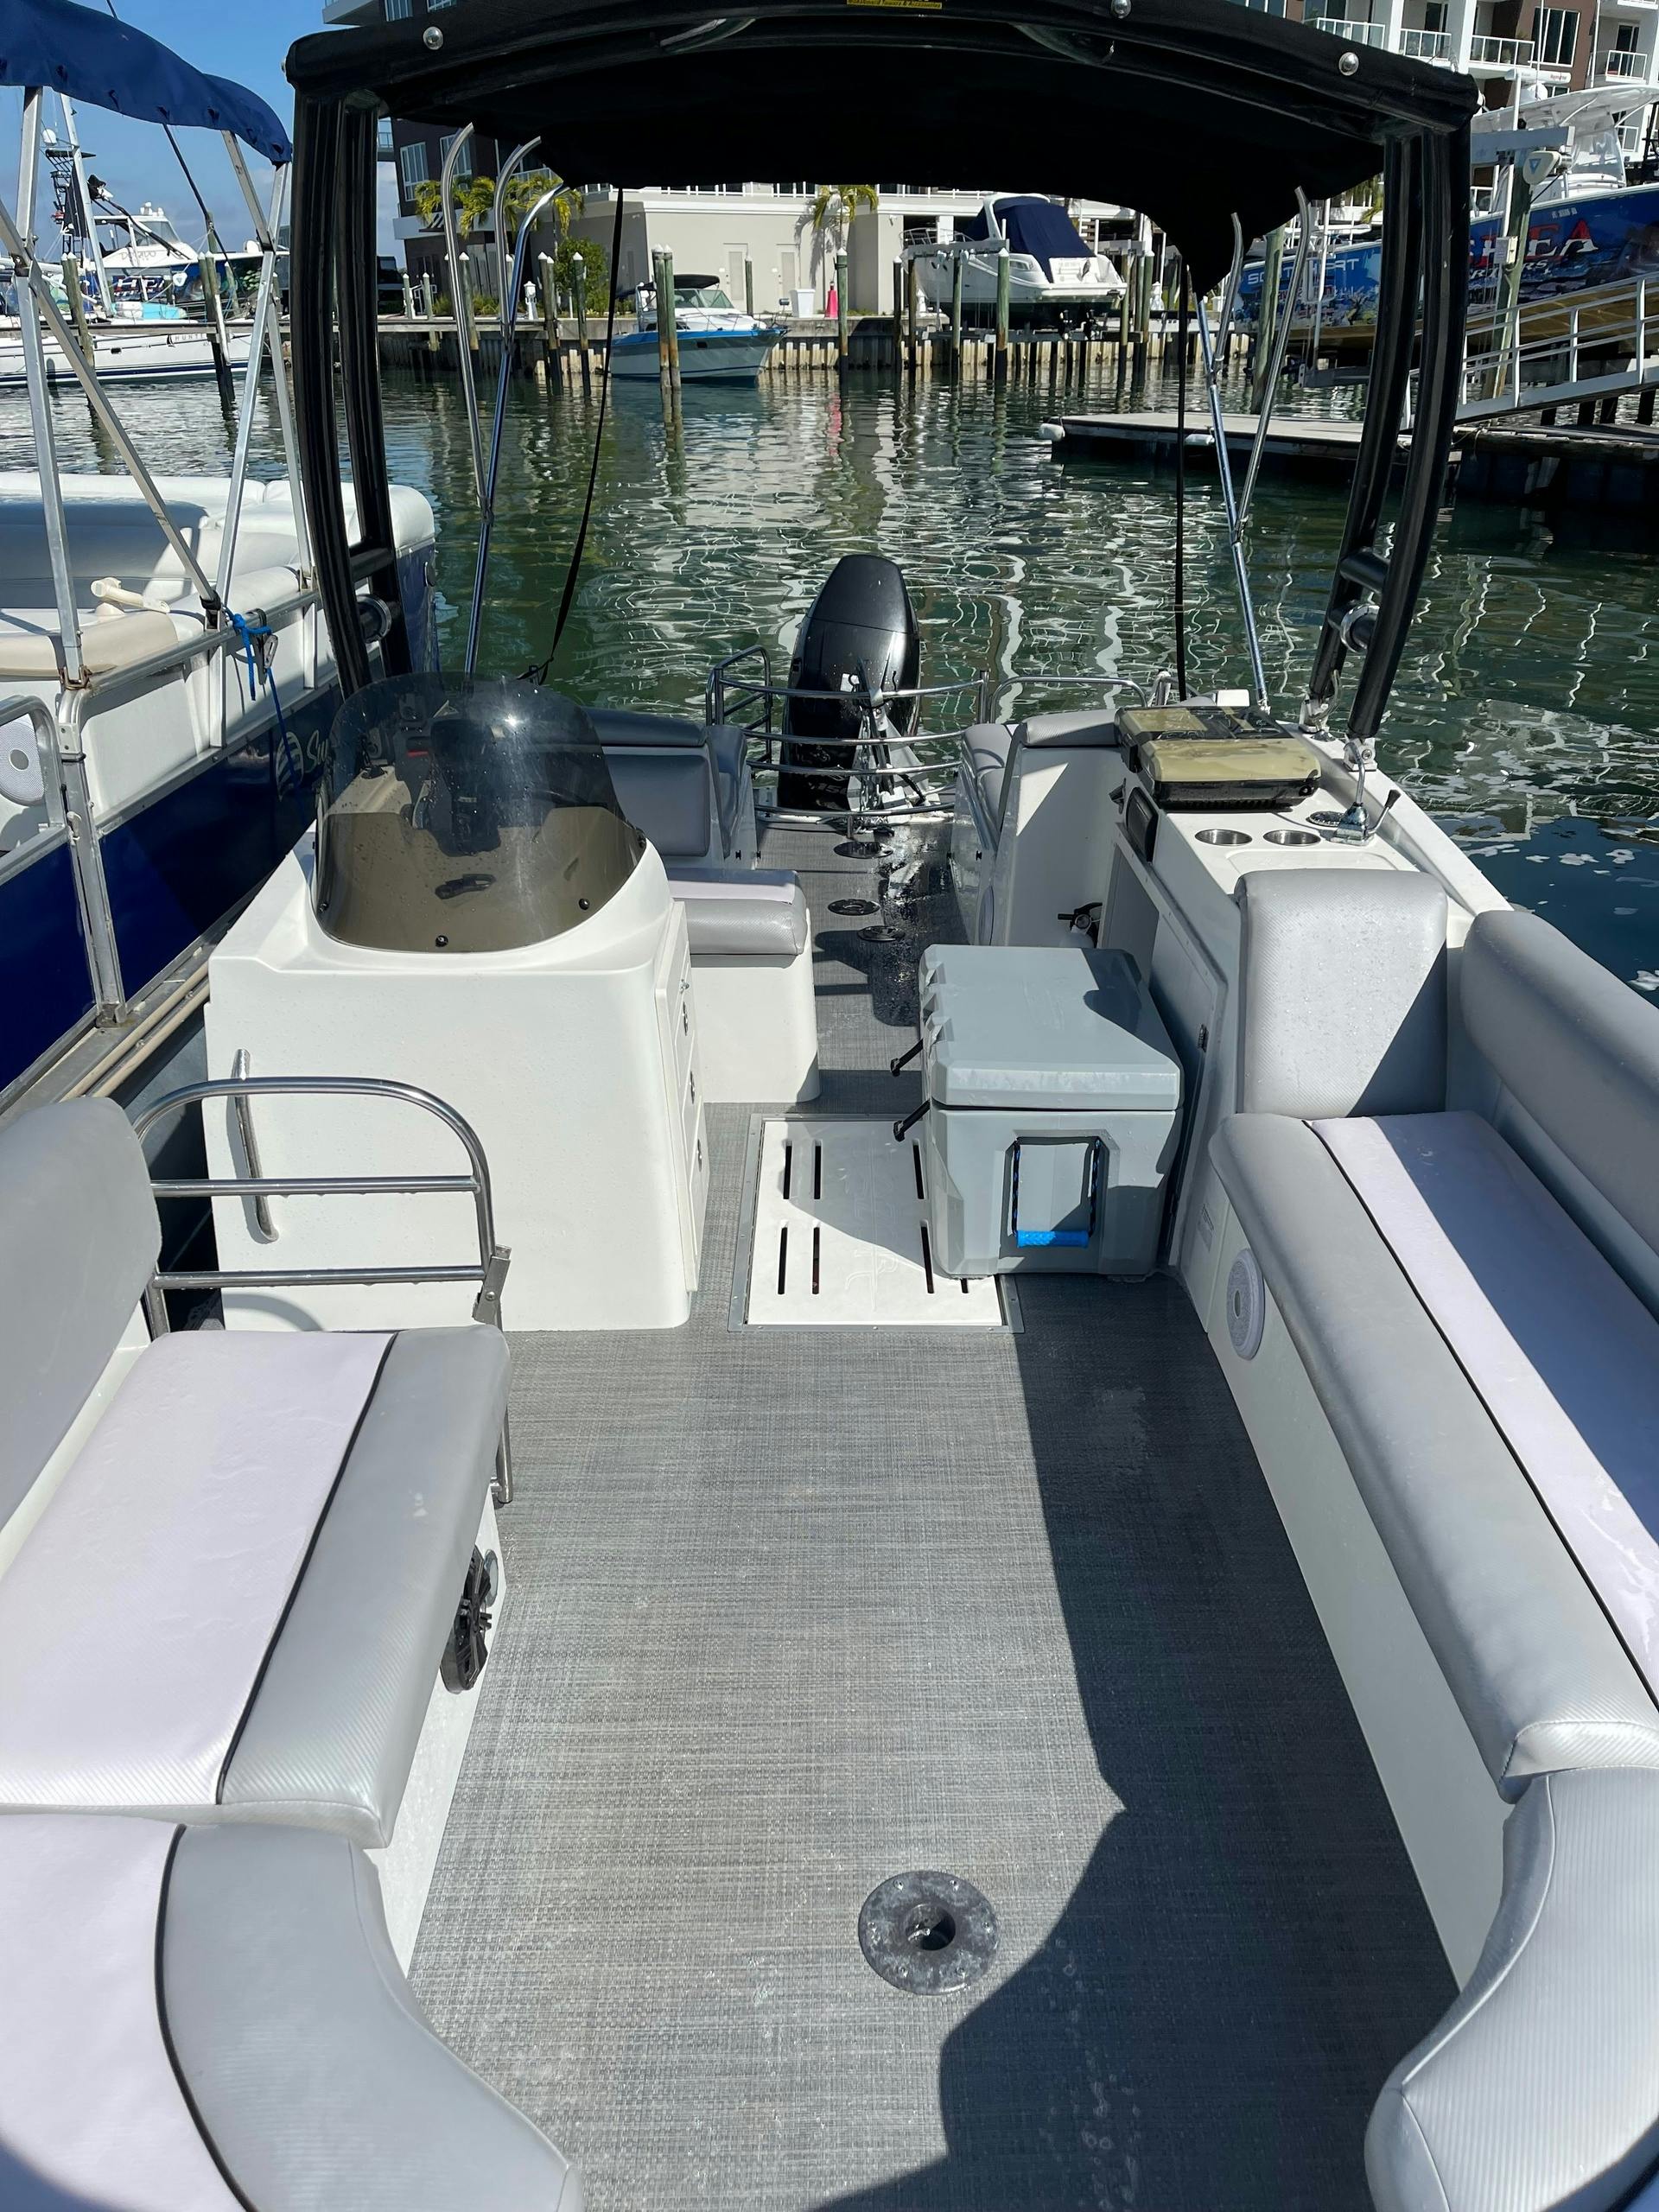 fareharbor-lagerheadcycleboats__clearwater|299886-707111